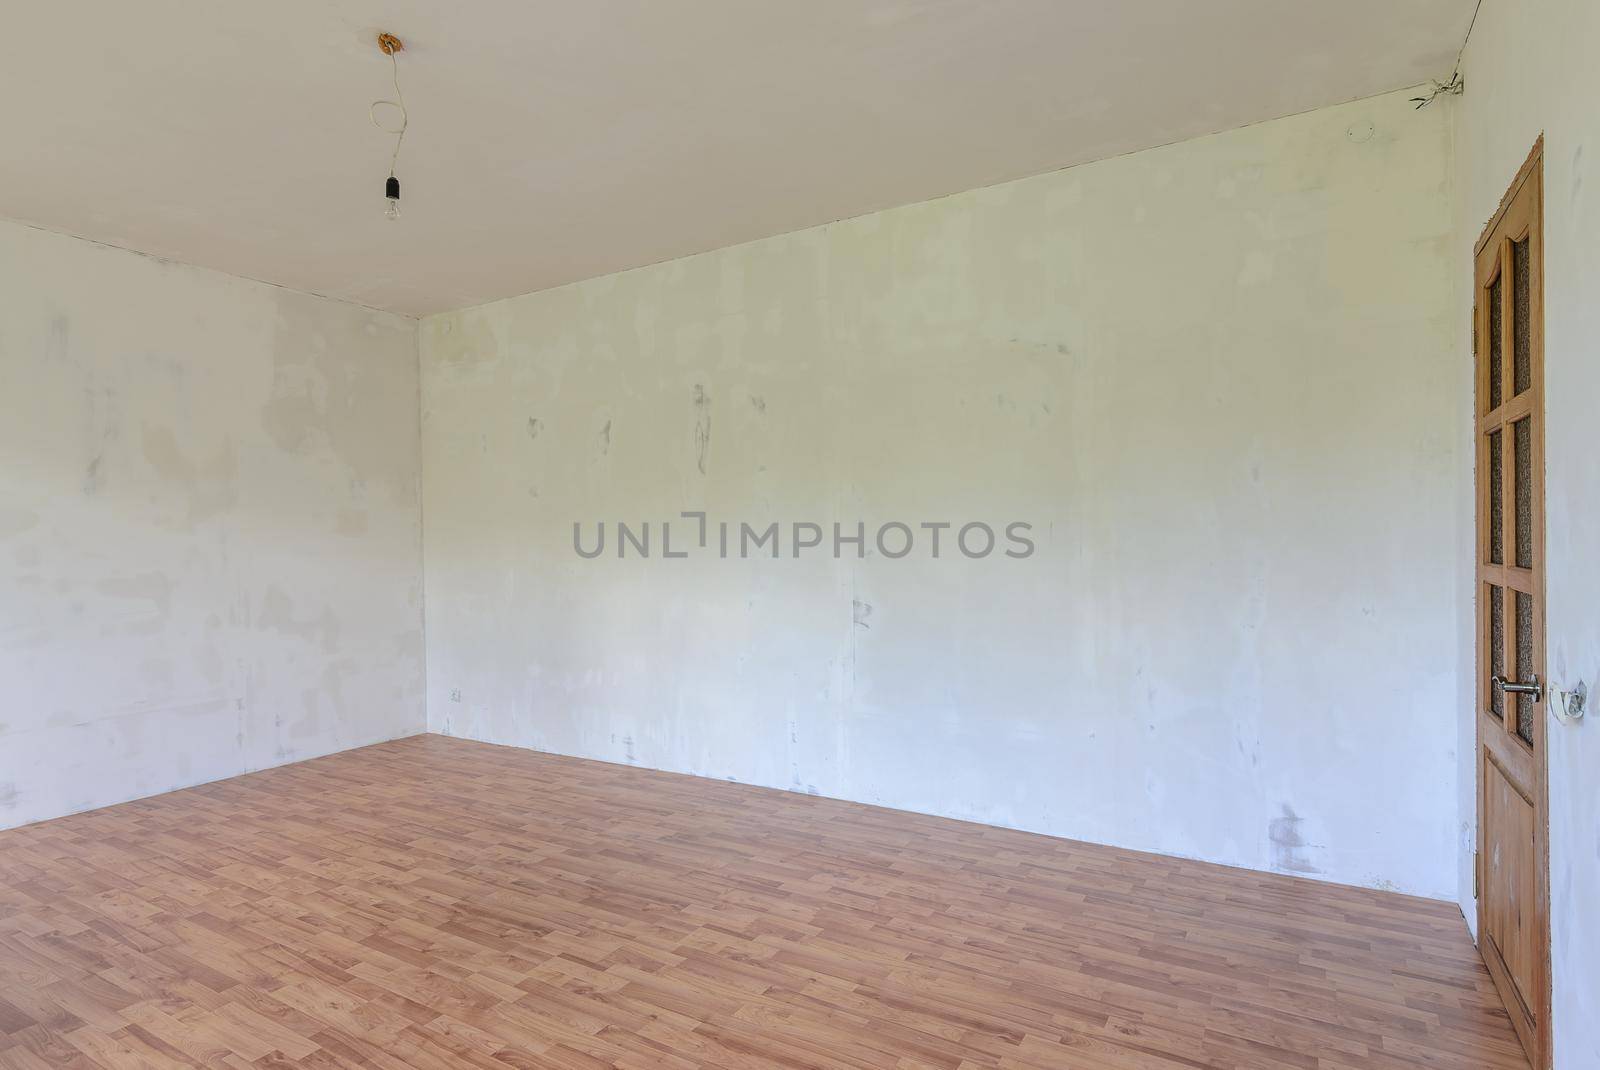 A fragment of the interior of a spacious room with a fine finish of the walls a